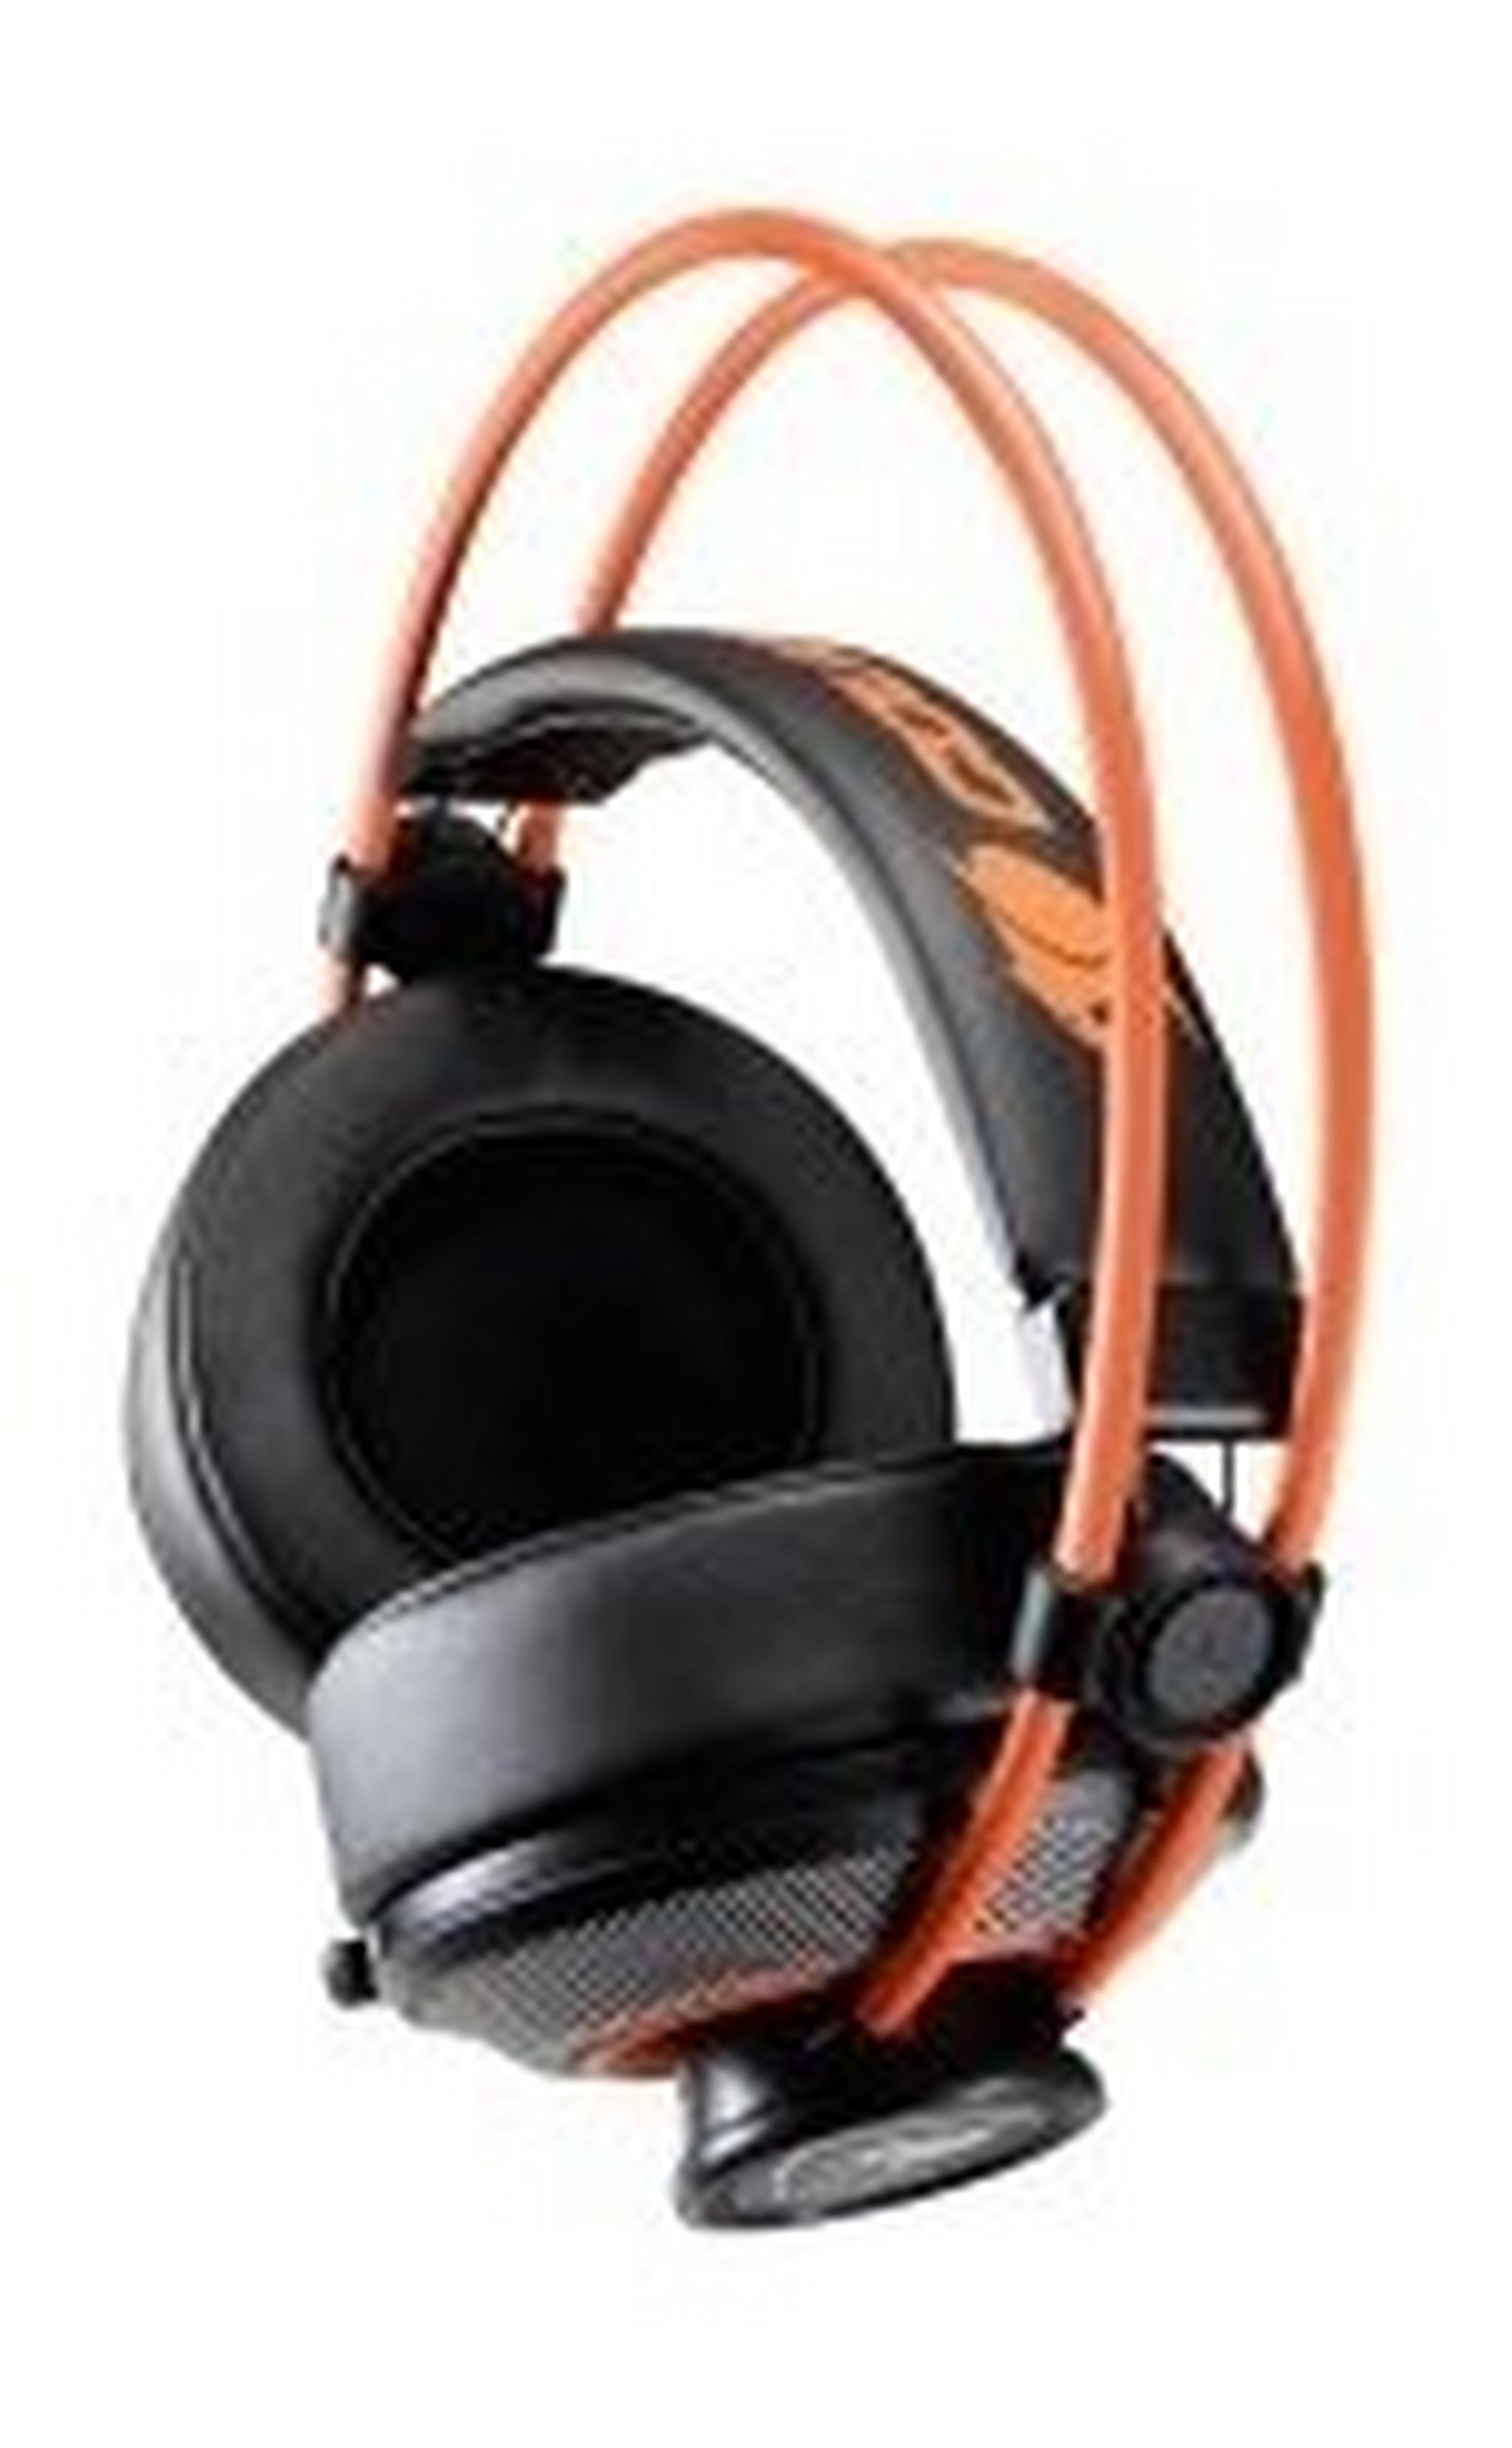 Cougar Immersa Wired Stereo Gaming Headset - Black